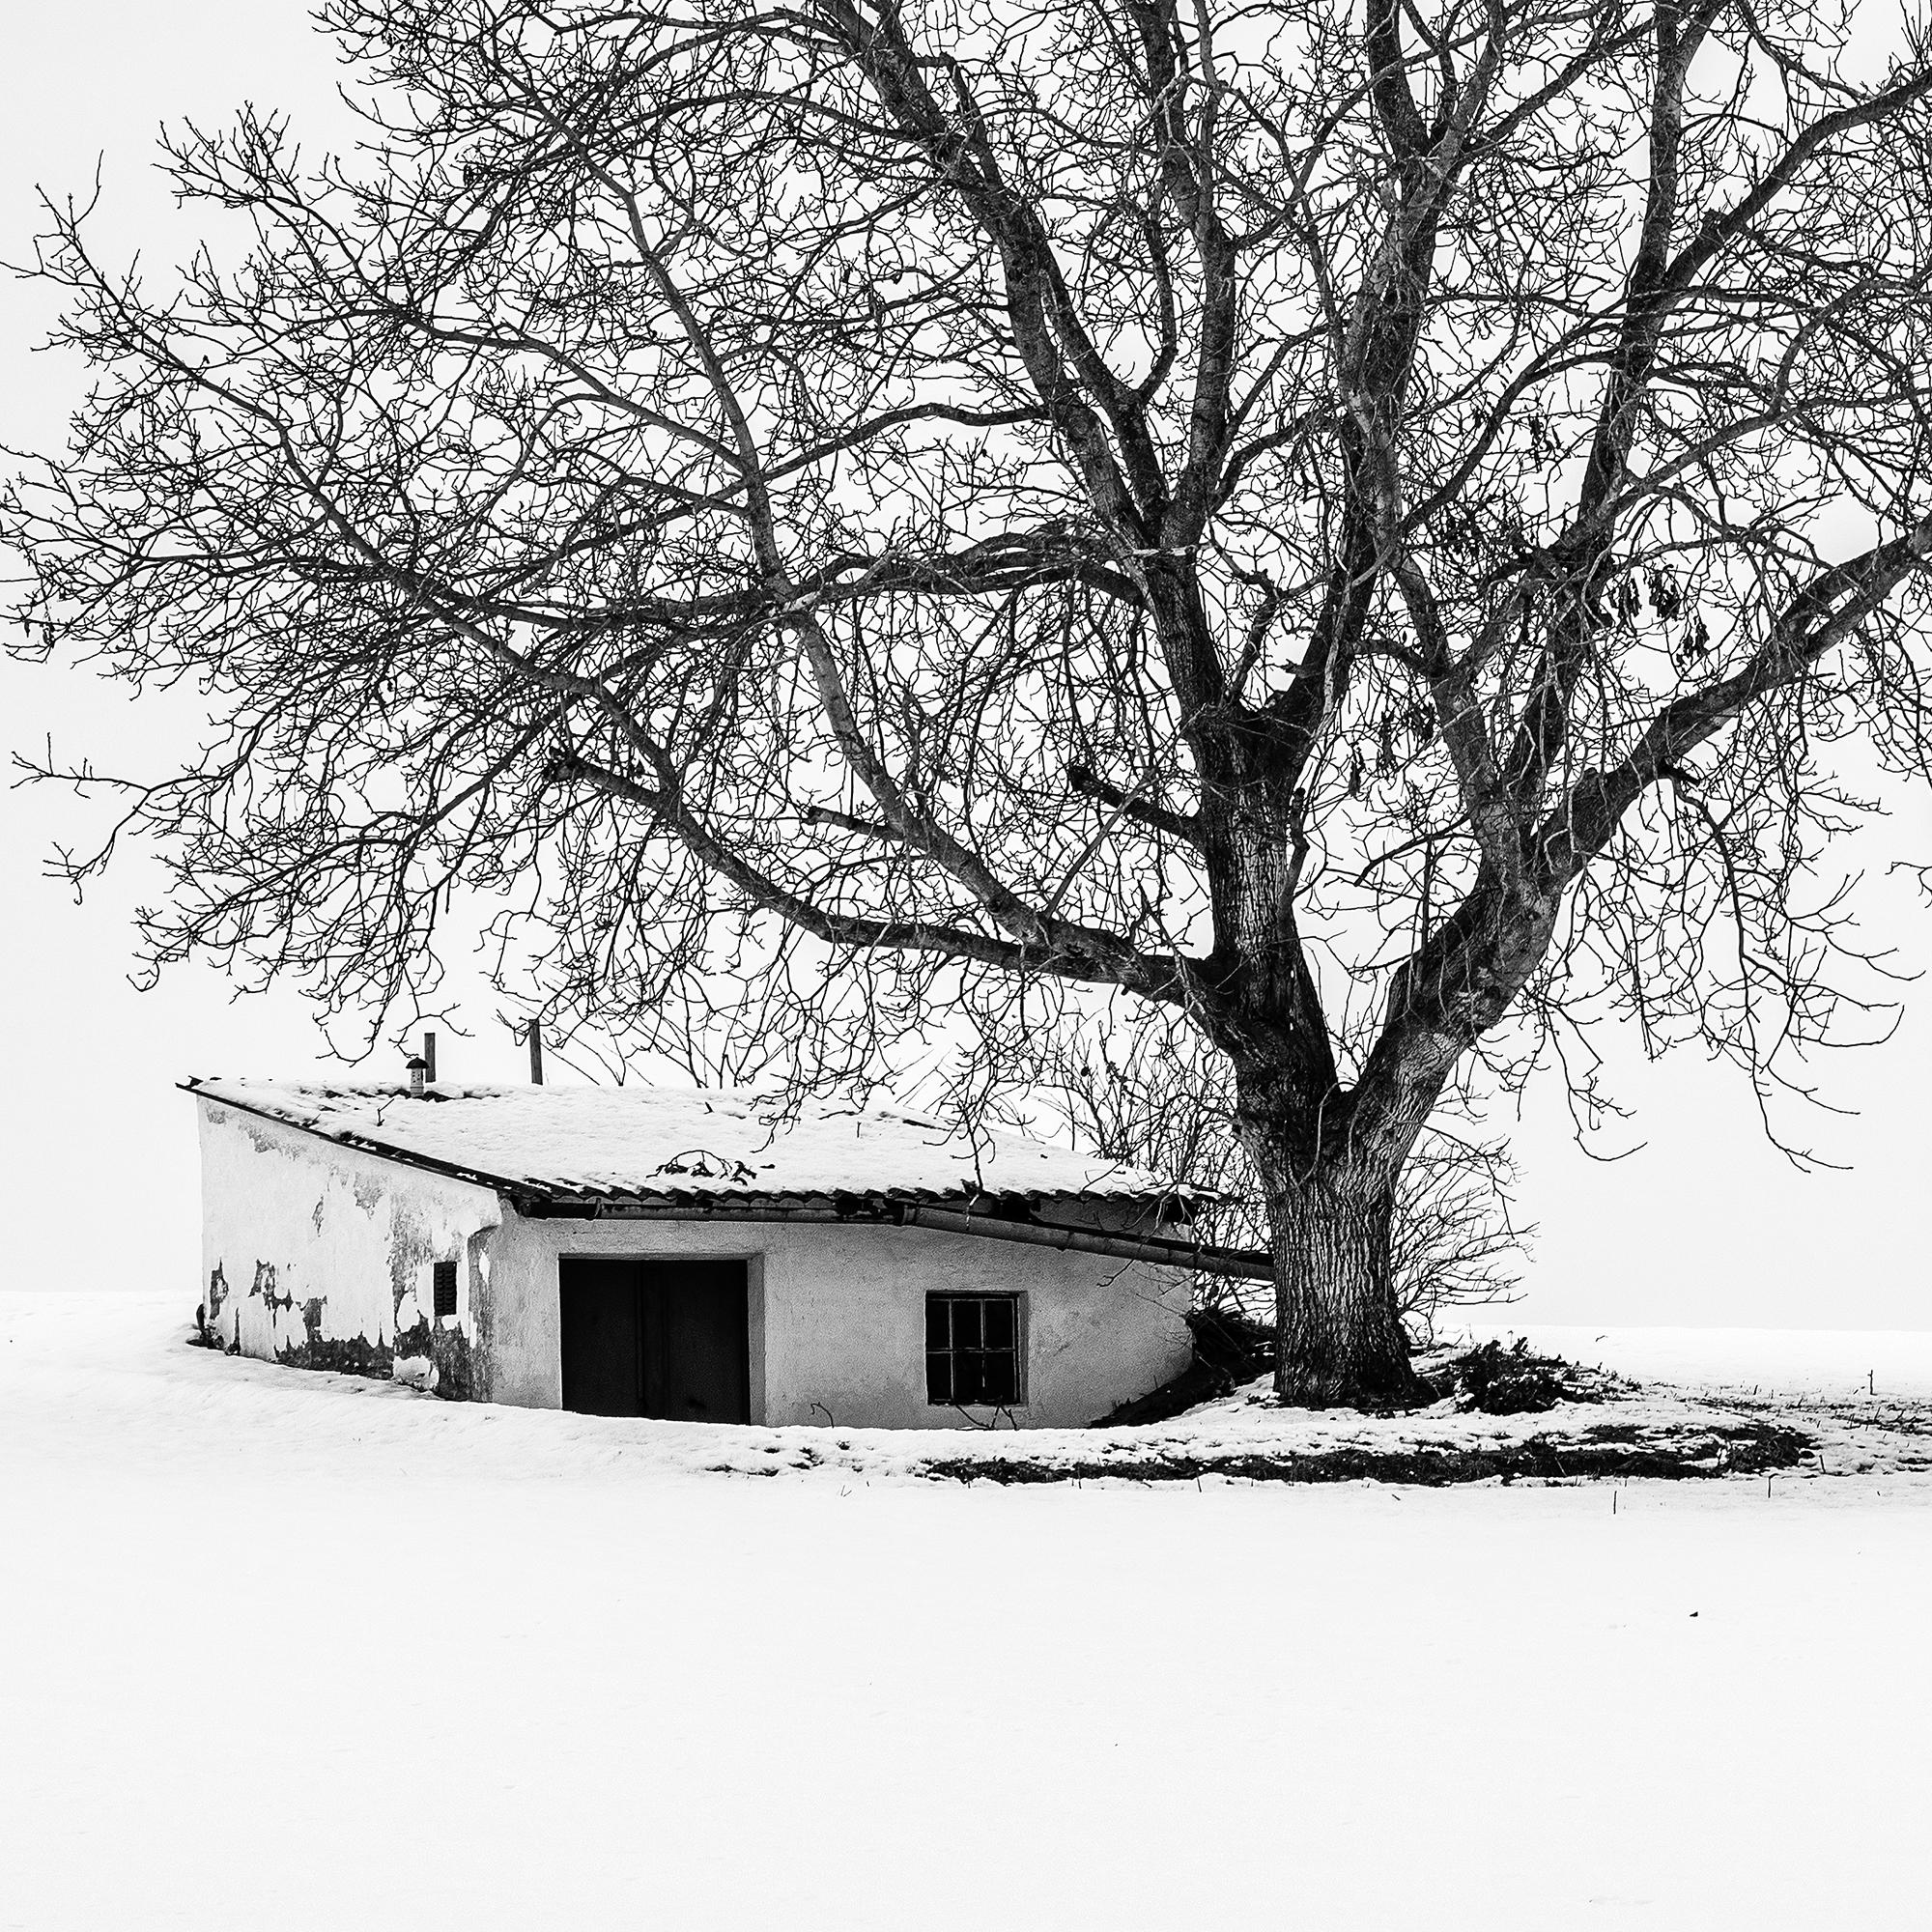 Wine Press House, snow, winter, black and white fine art landscape photography For Sale 3